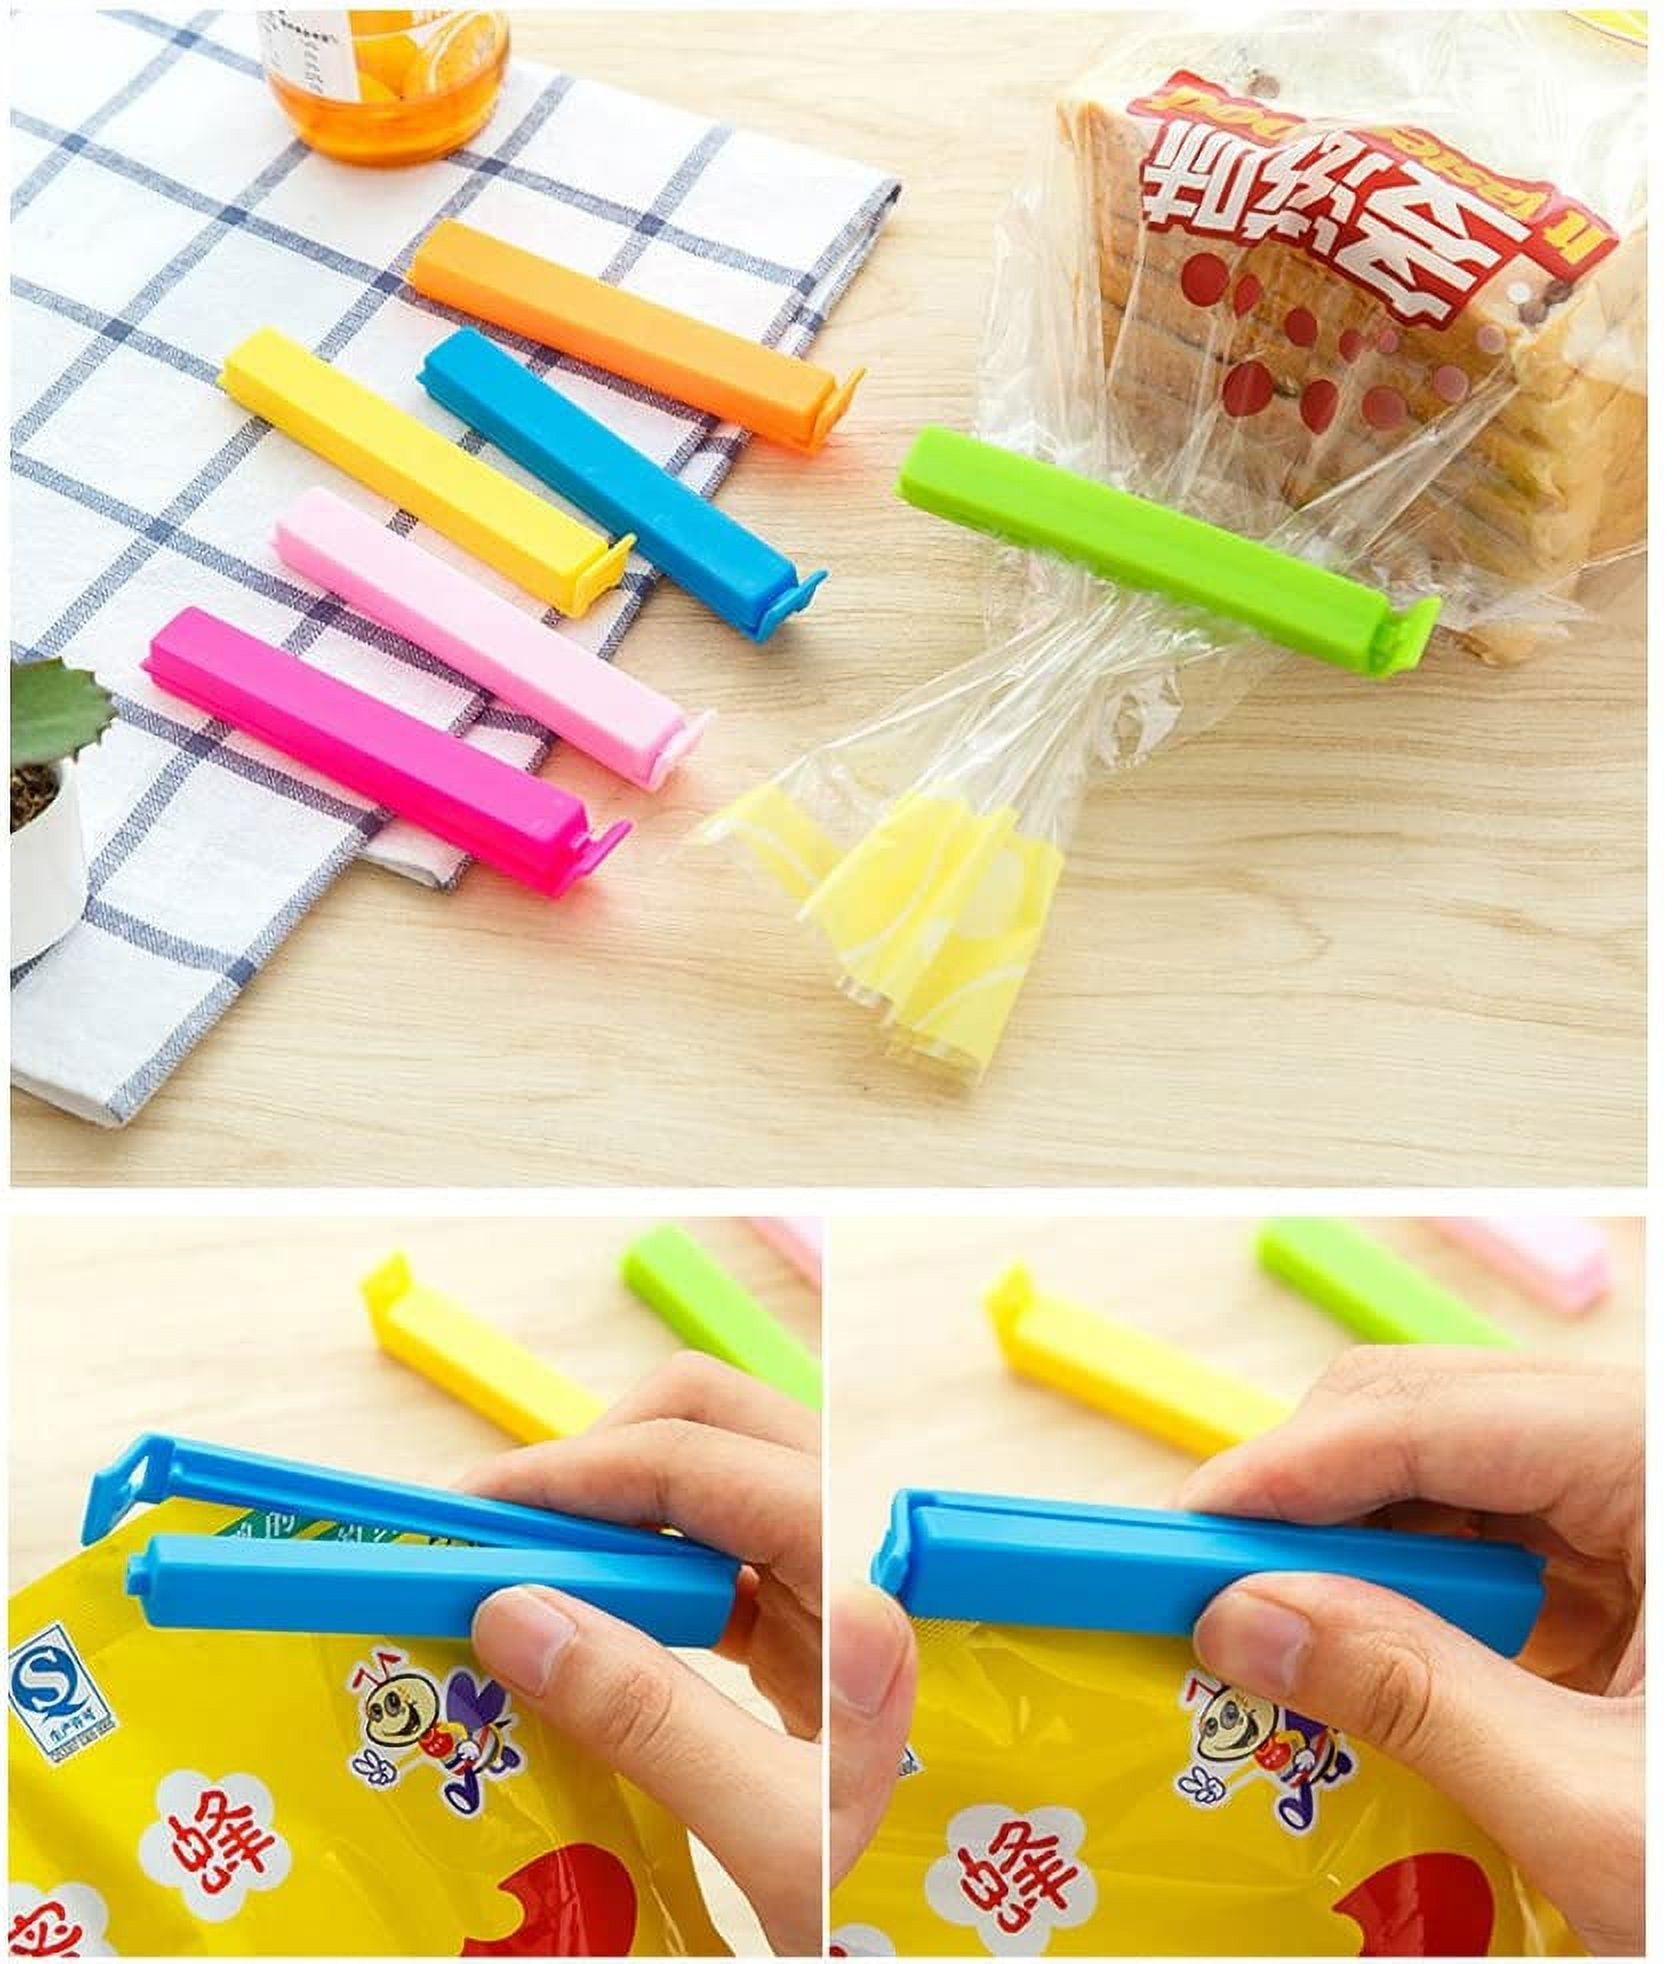 6pcs Kitchen Plastic Bag Sealing Clips, Snack Bag Moisture Proof Airtight  Clips, Household Food Freshness Sealer Clamp, For Snack, Chips Bags, Food